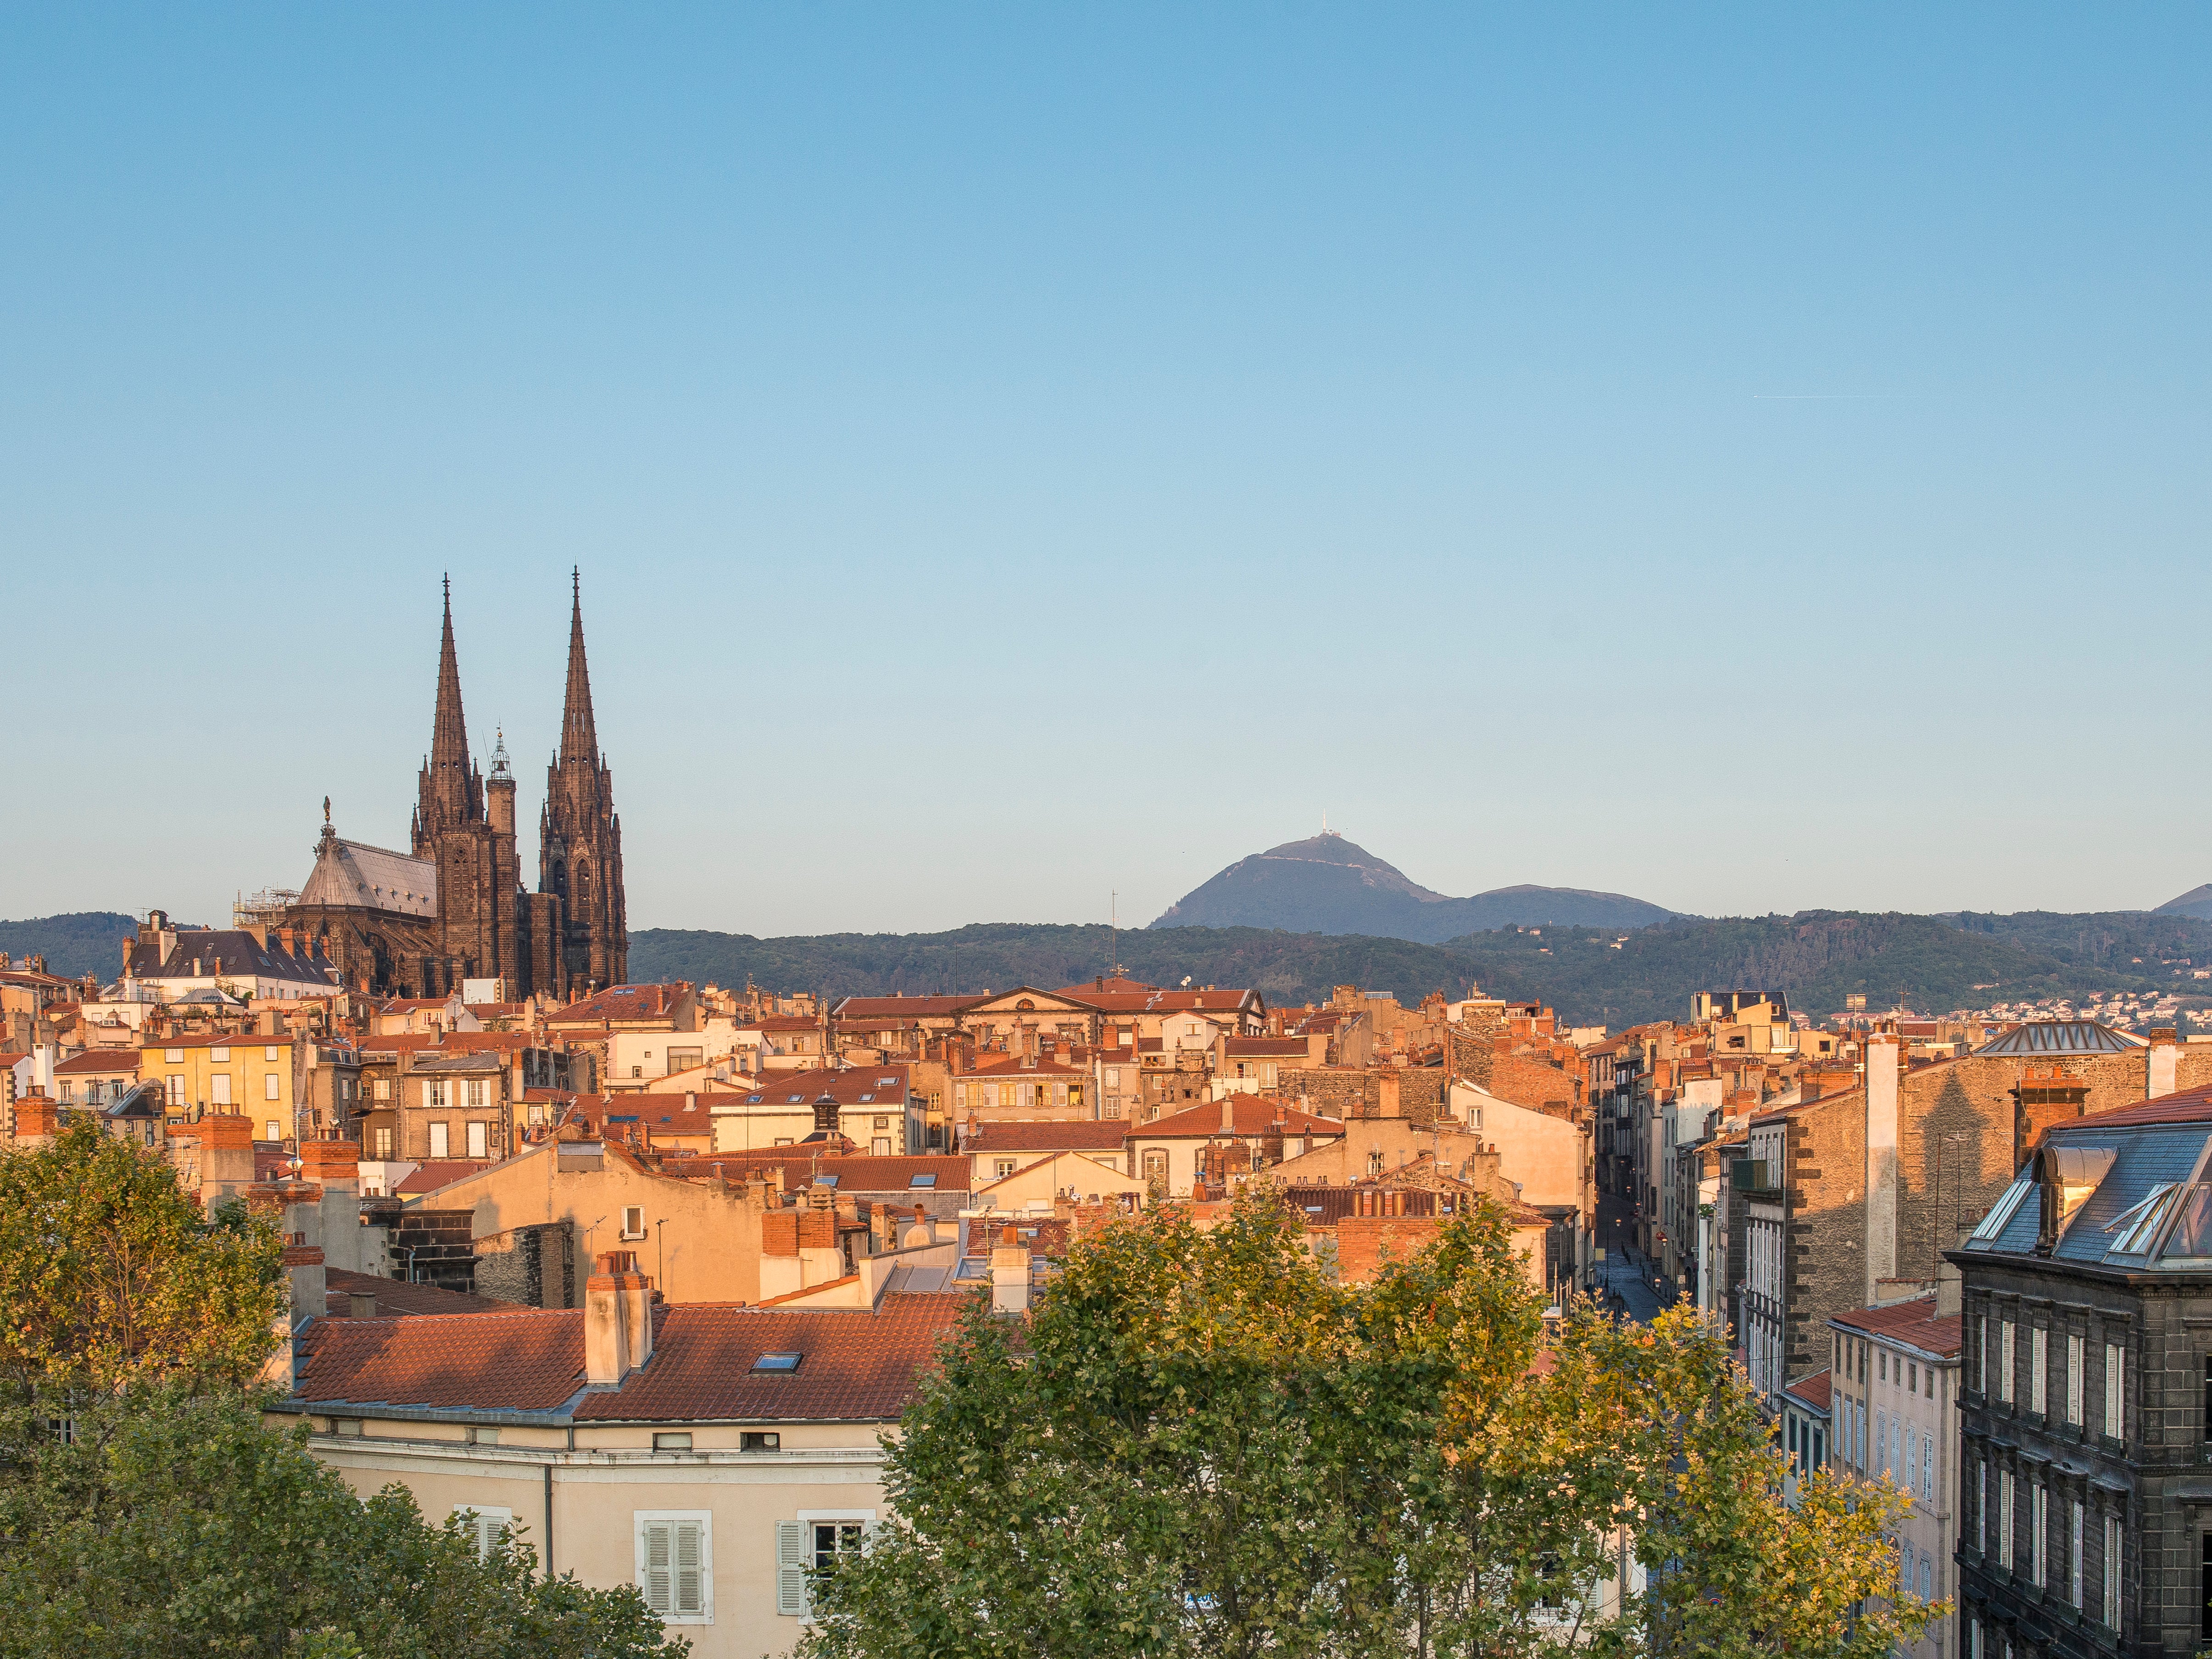 Clermont-Ferrand with the Puy de Dome volcano in the background